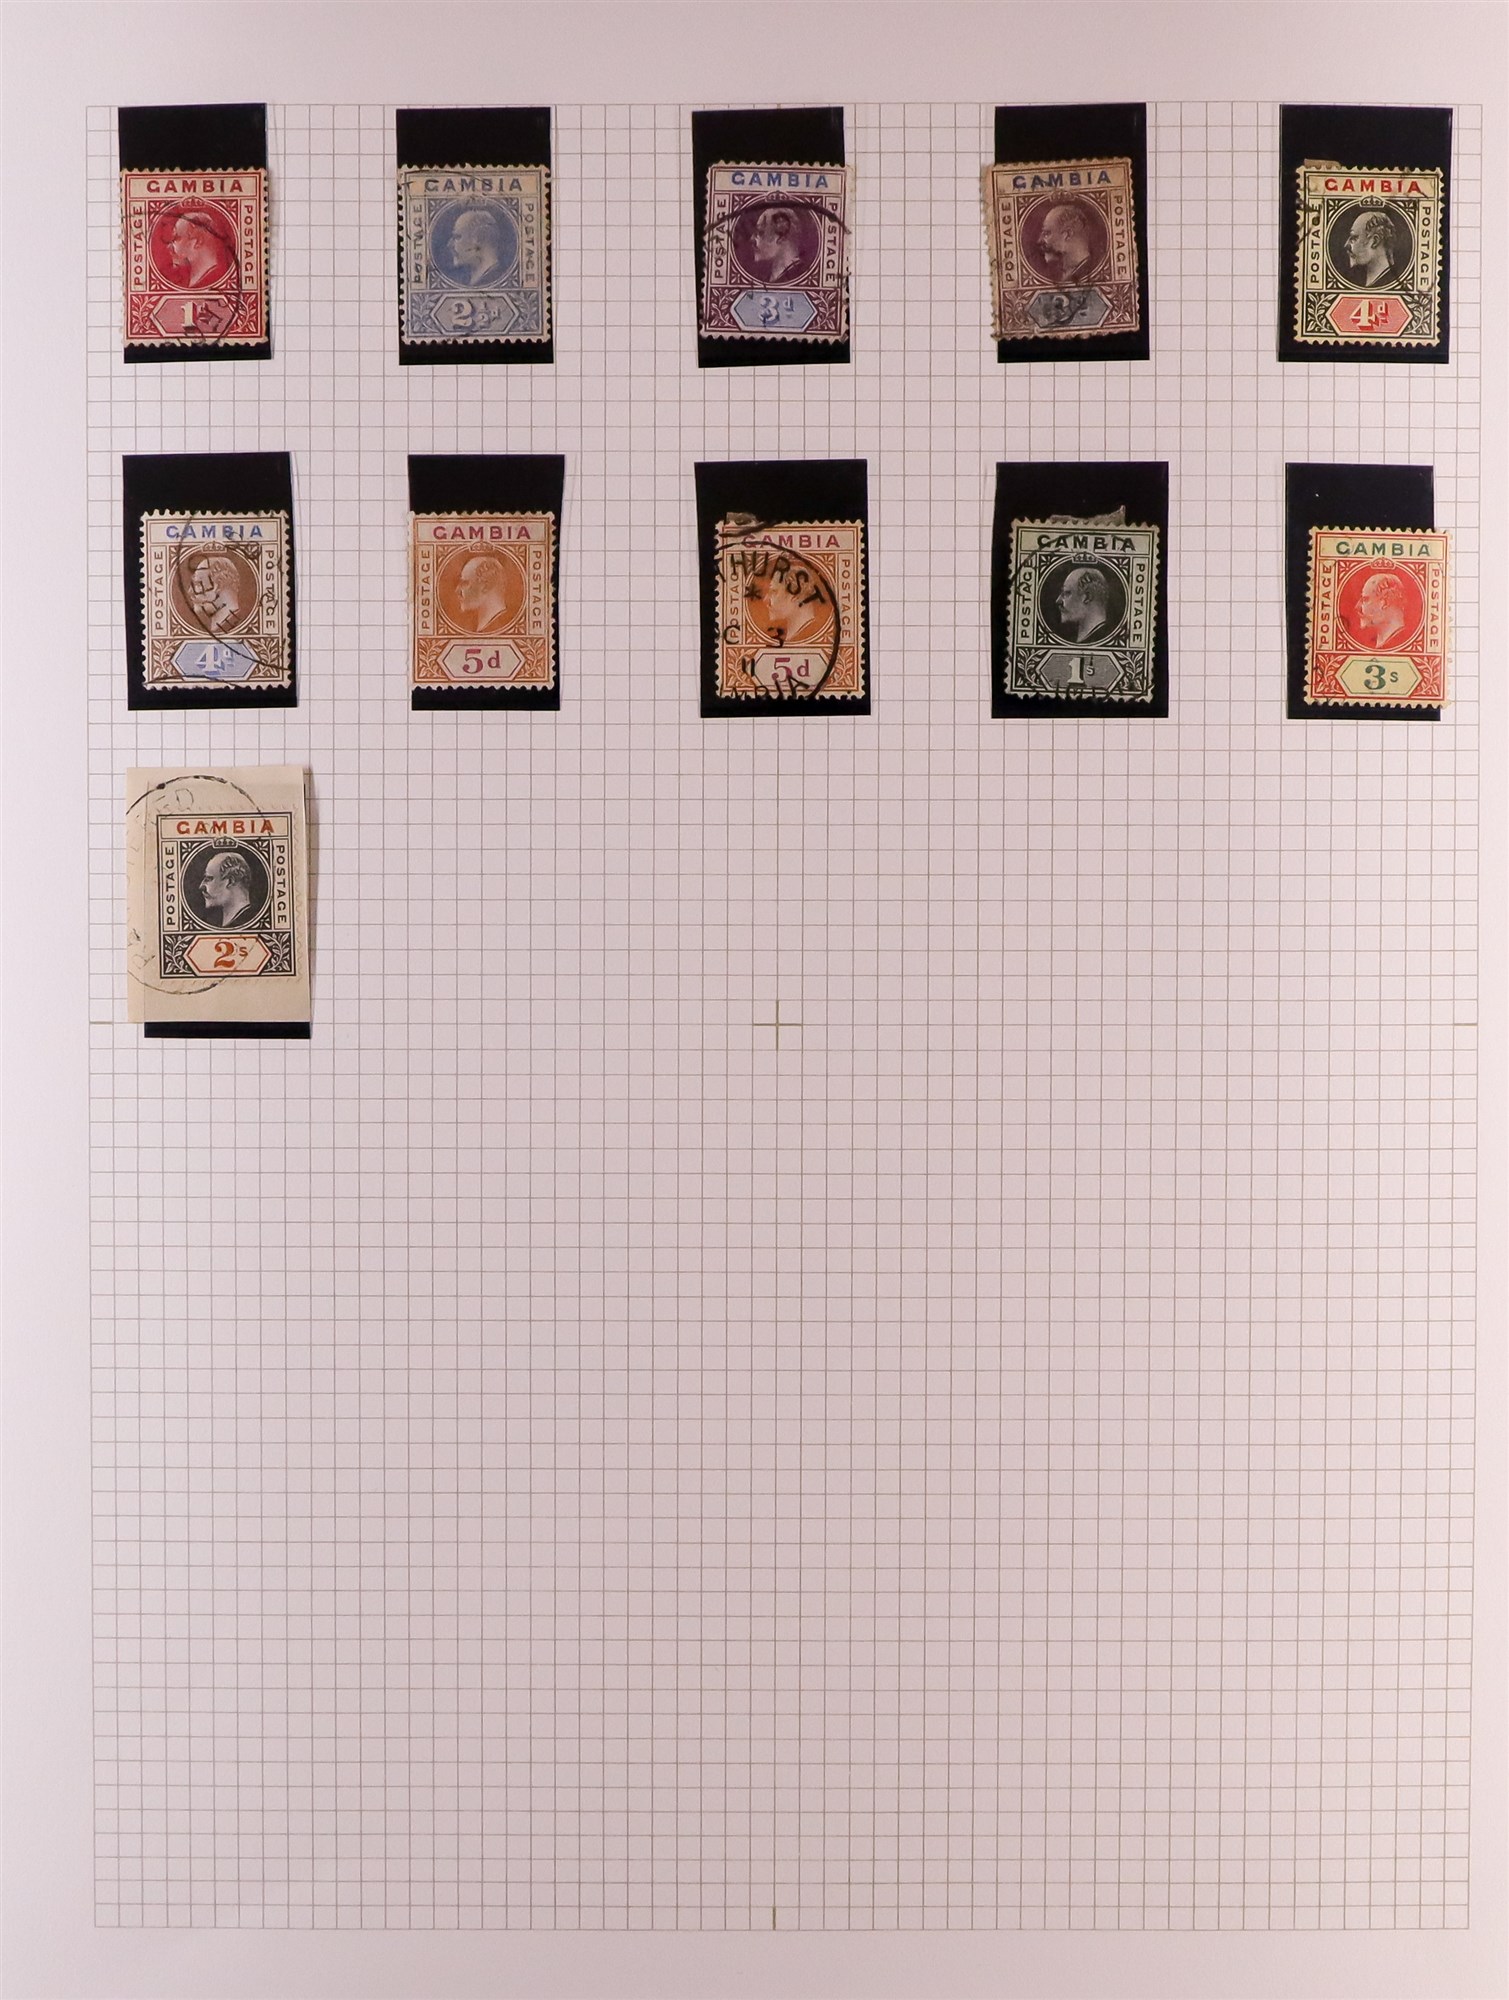 GAMBIA 1880 - 1935 COLLECTION incl. various Cameo issues mint, 1s violet used strip 3, 1902-05 set - Image 8 of 15